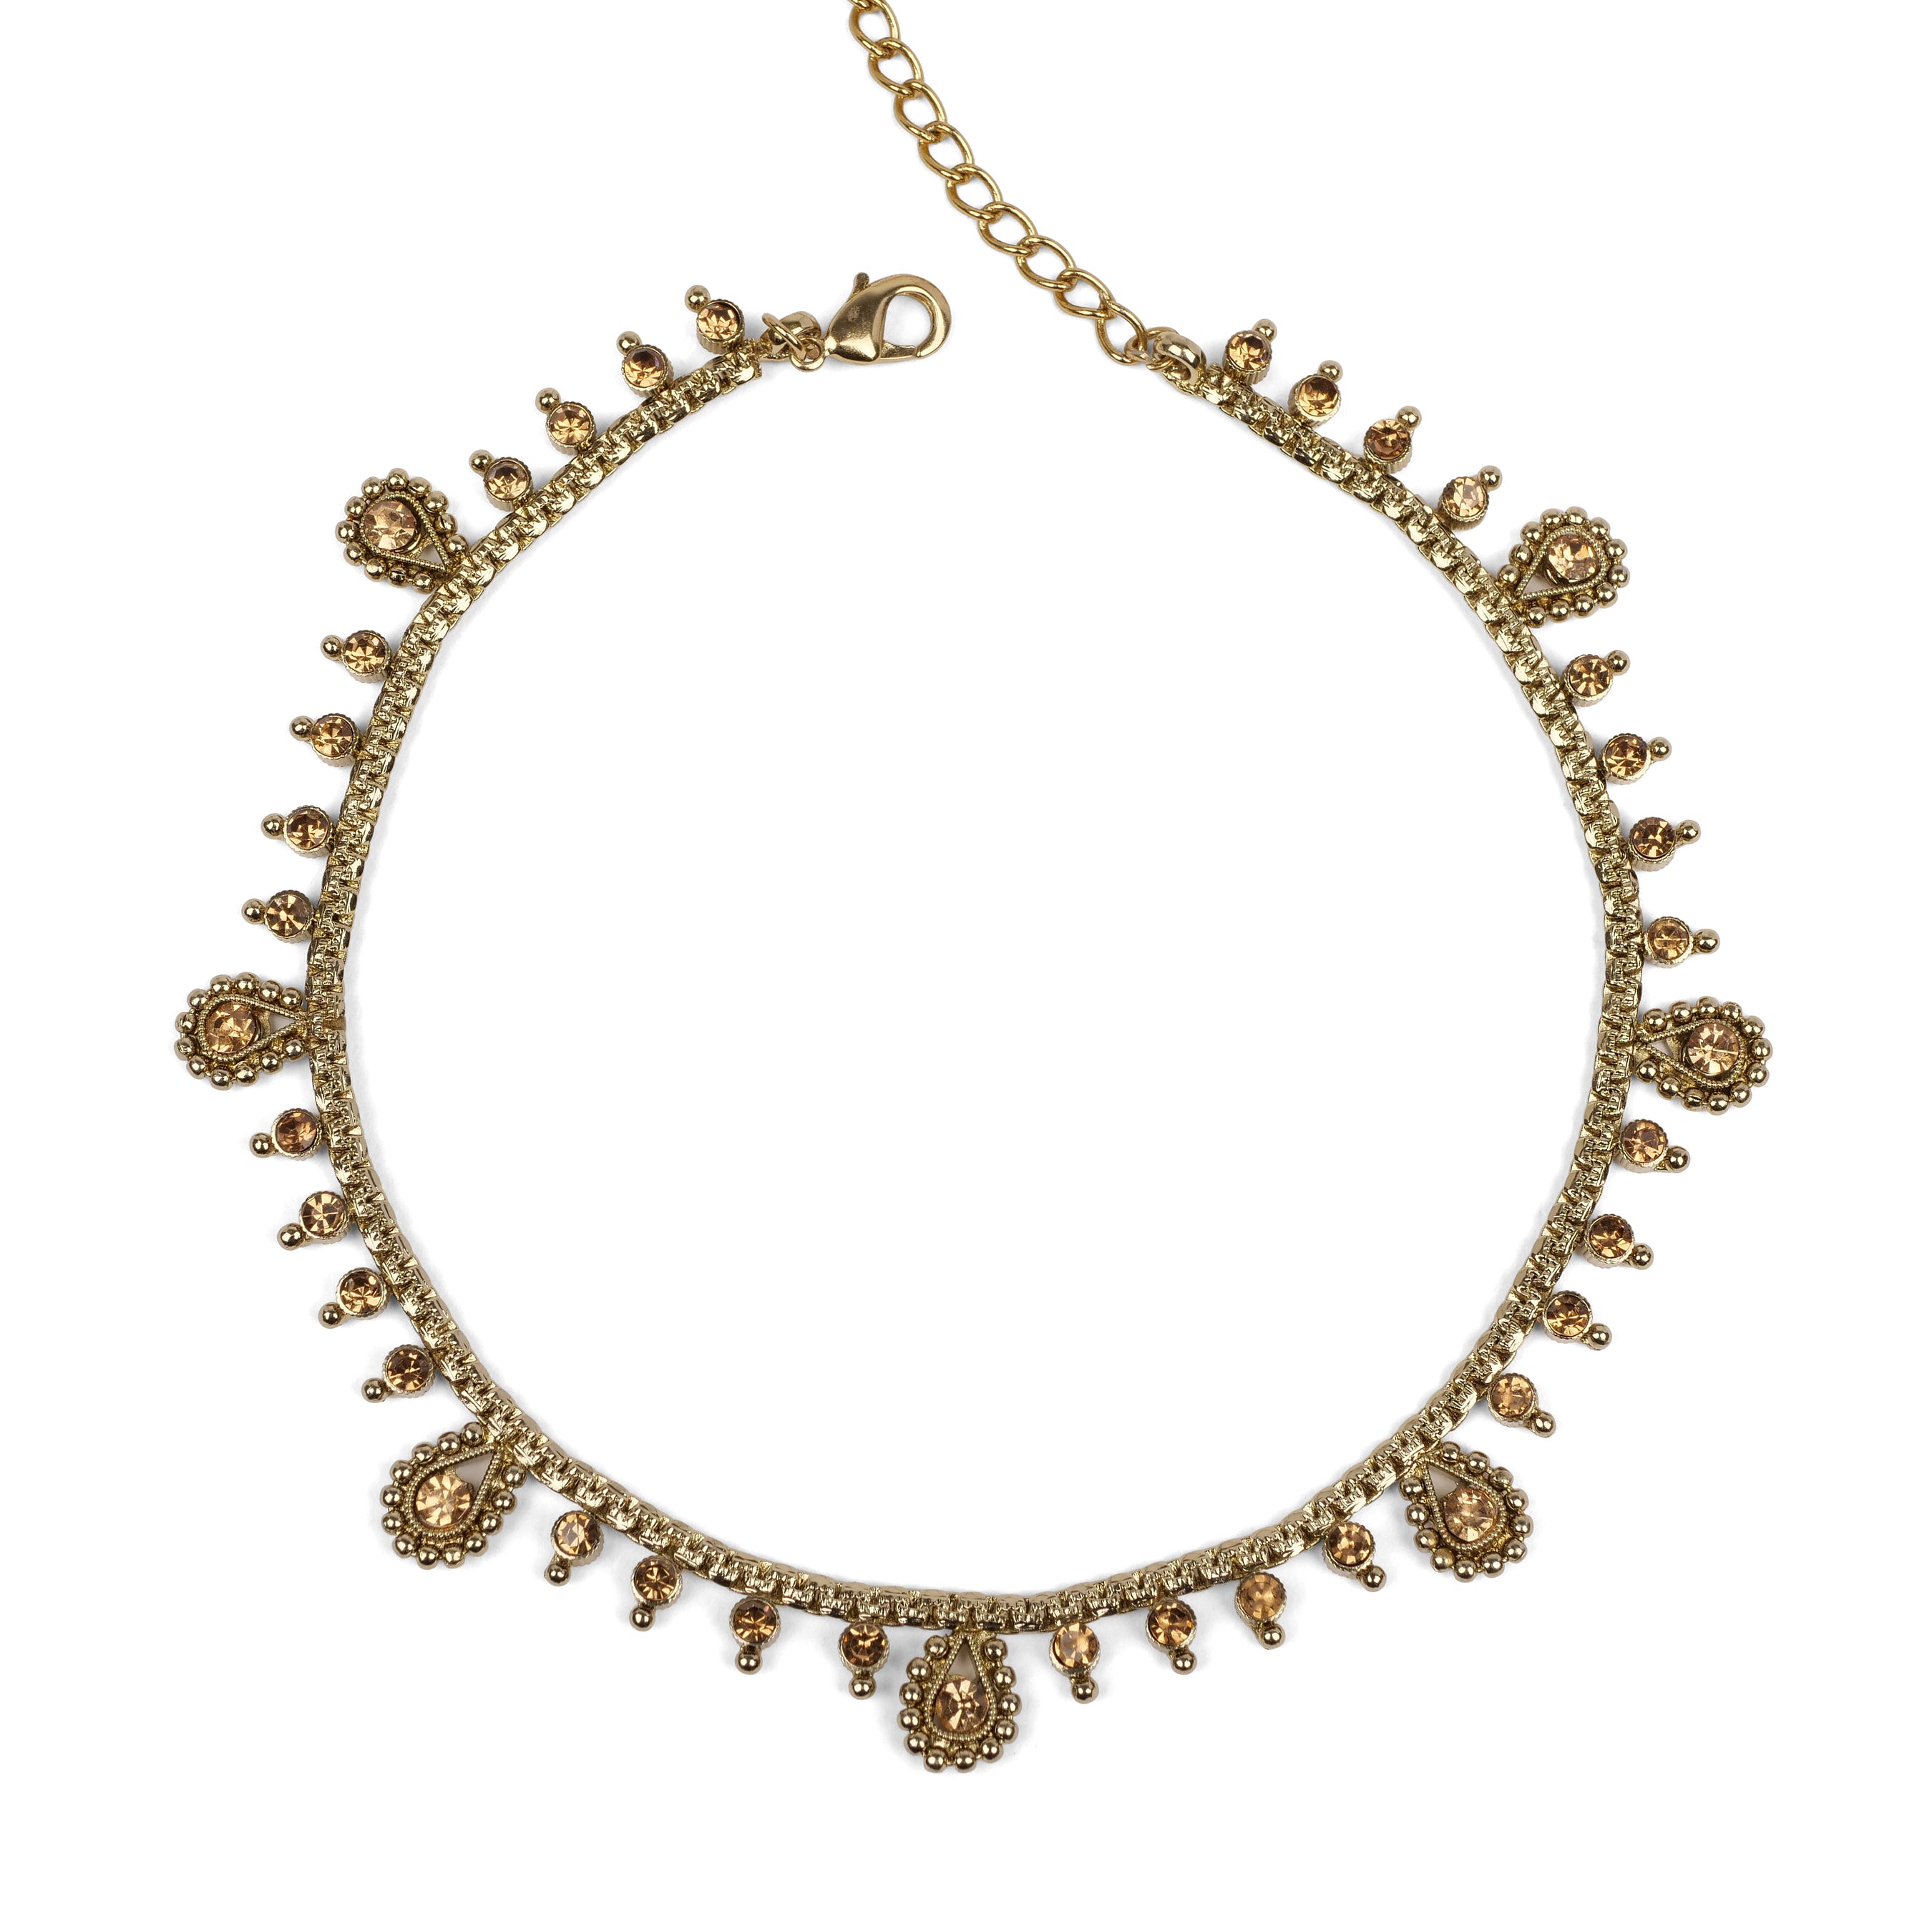 Nisha Champagne and Gold Crystal Anklet